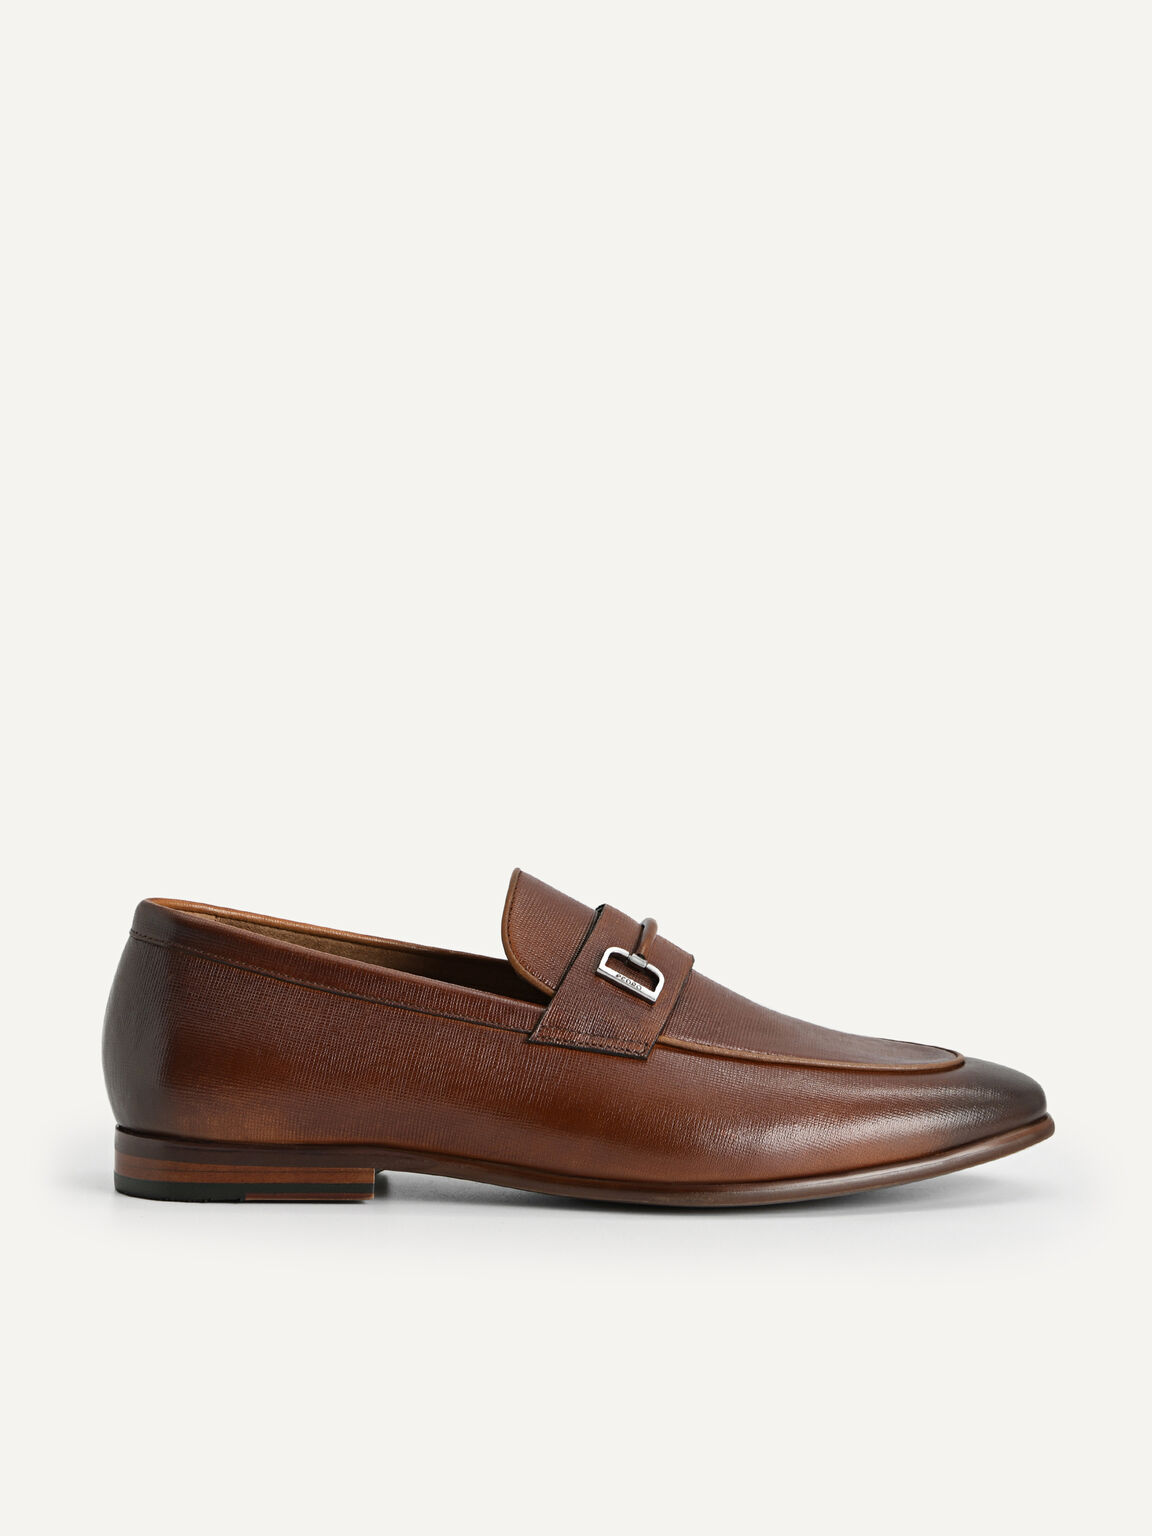 Textured Leather Loafers with Metal Bit - Cognac